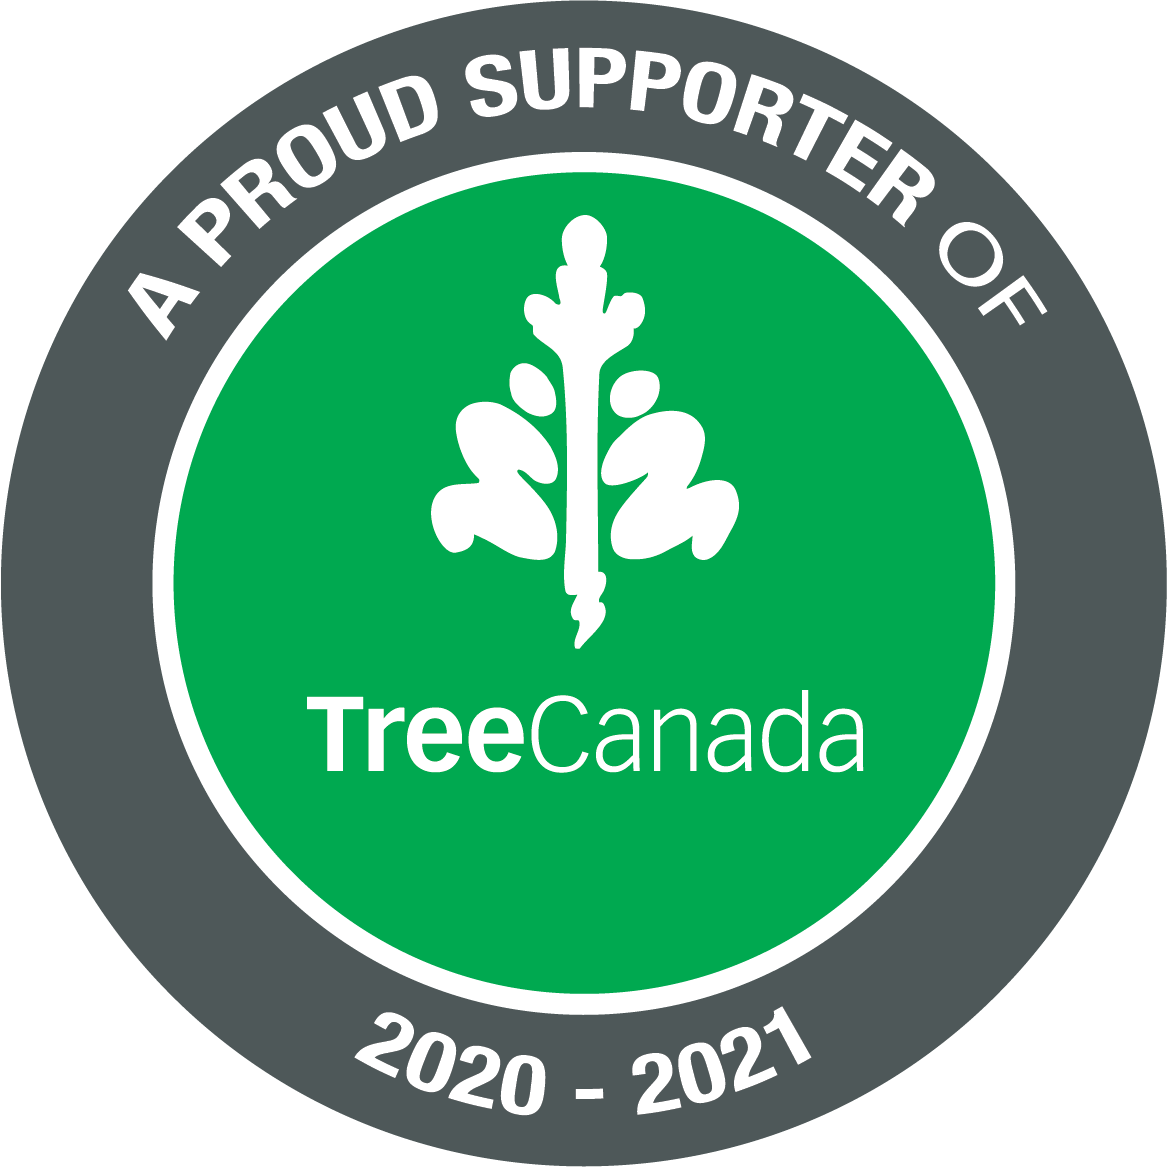 A Proud Supporter of Tree Canada